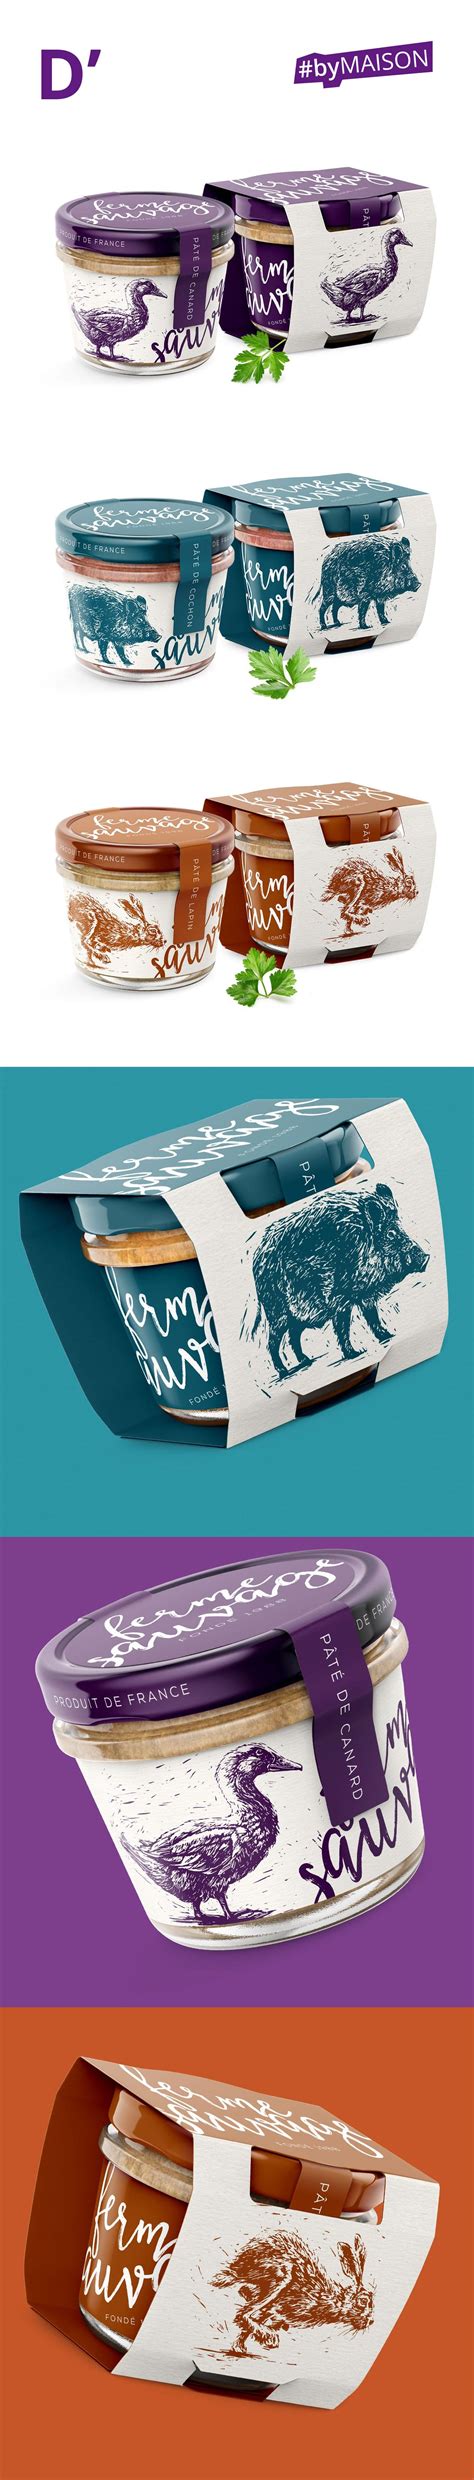 WE DESIGNED AN ILLUSTRATED PACKAGING DESIGN FOR A SERIES OF FRENCH PÂTÉ ...